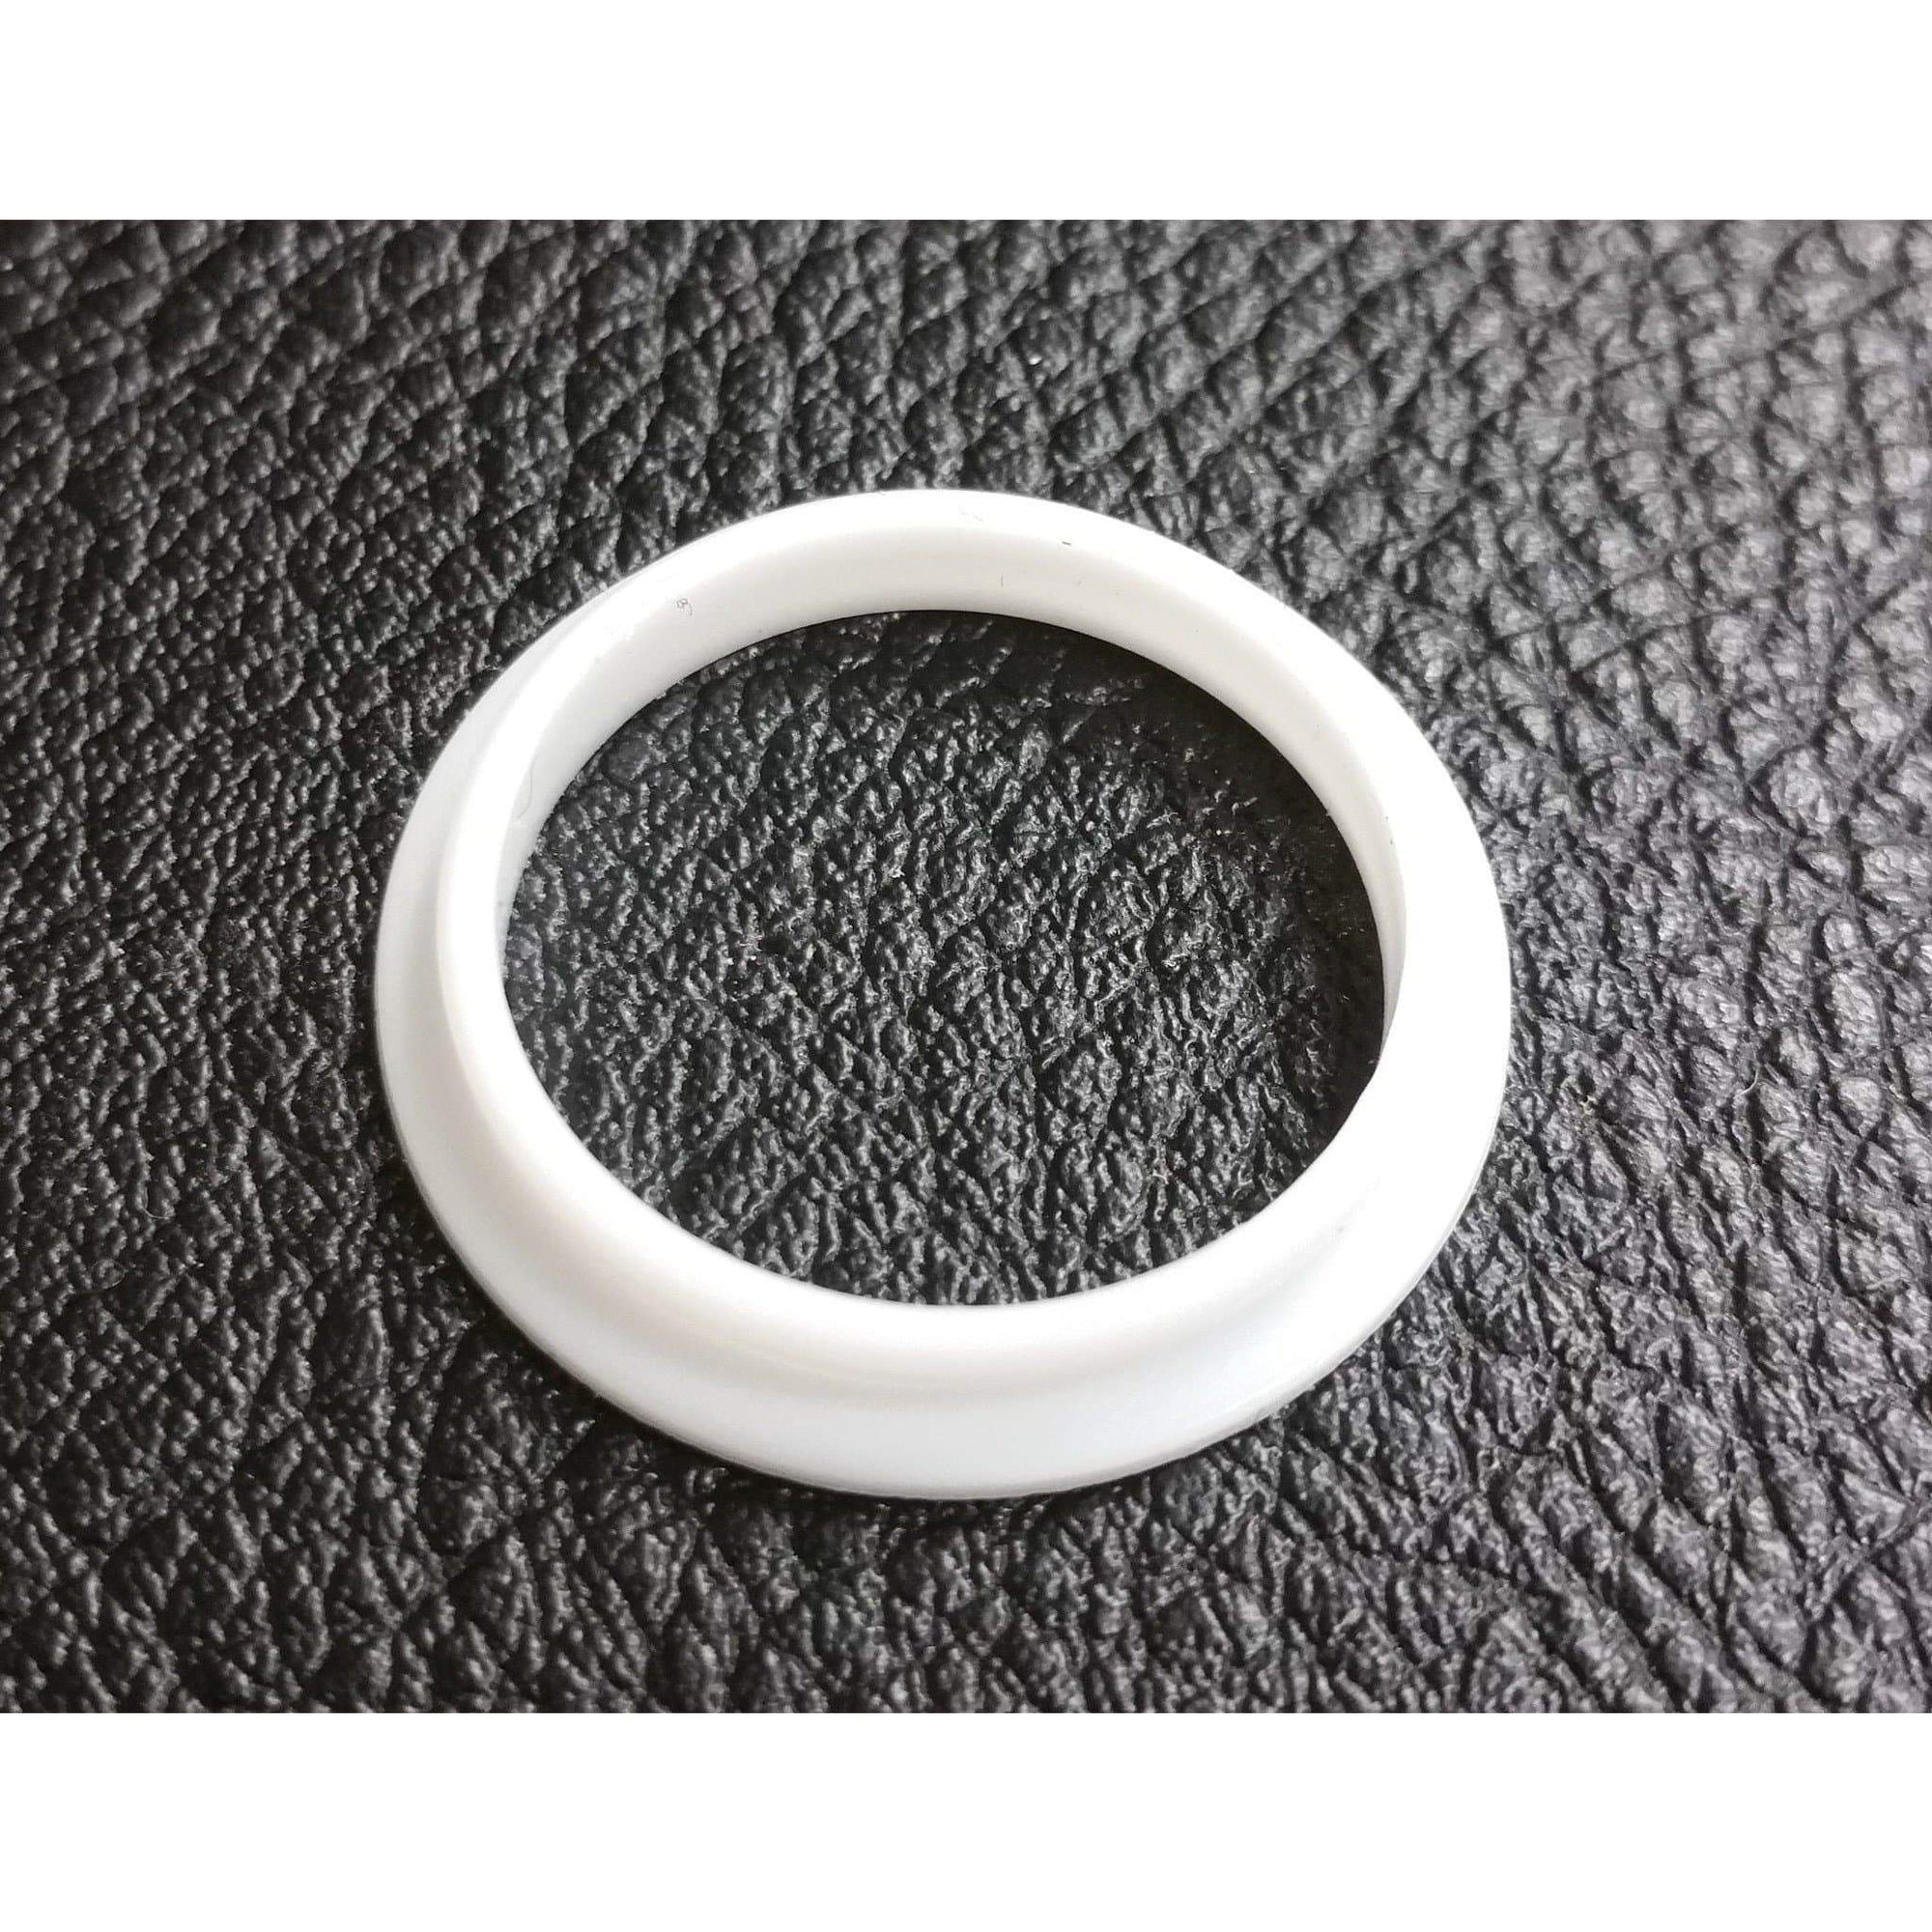 TFV4 Replacement Seals Top white disc seal Seals/Oring's